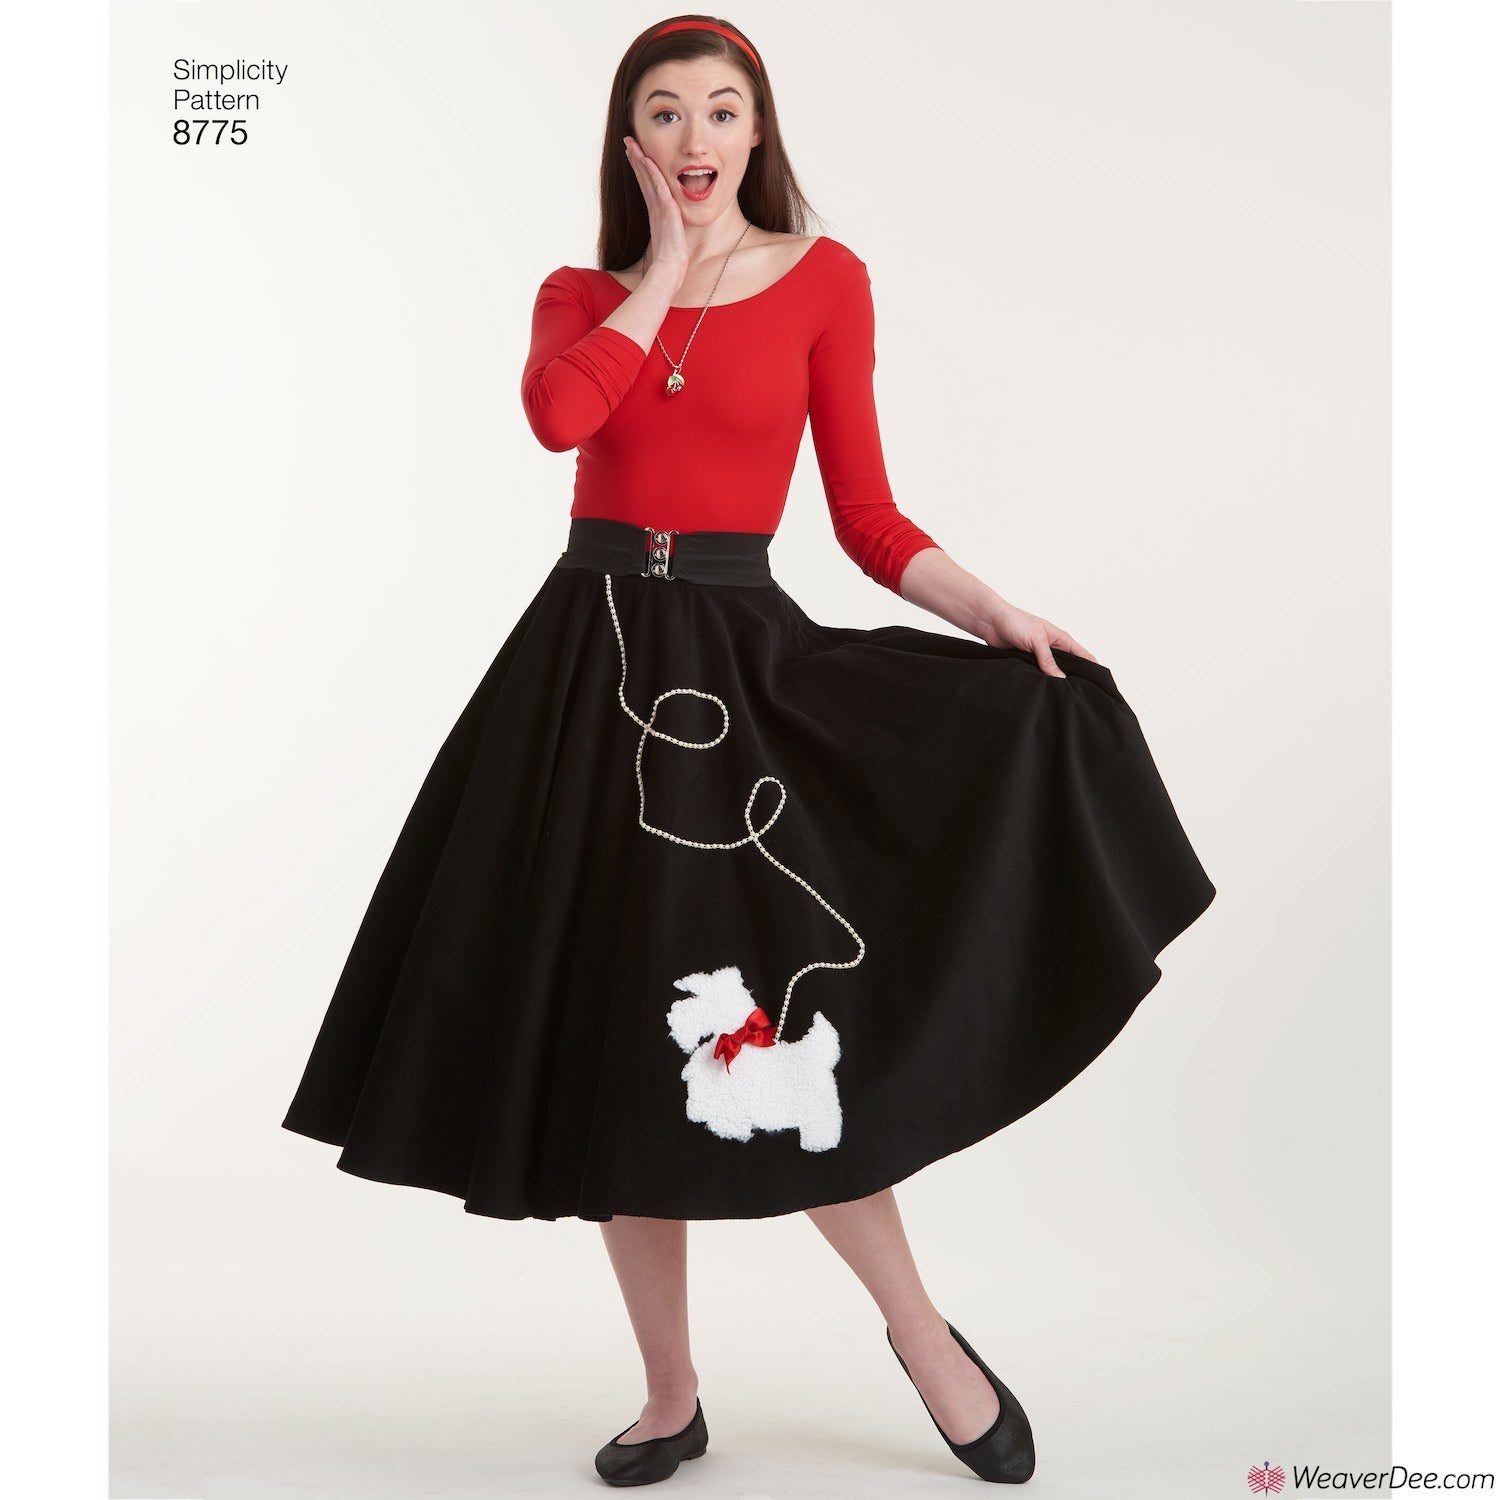 Halloween Costume Ideas Very LowSew POODLE SKIRT  Make It  Love It